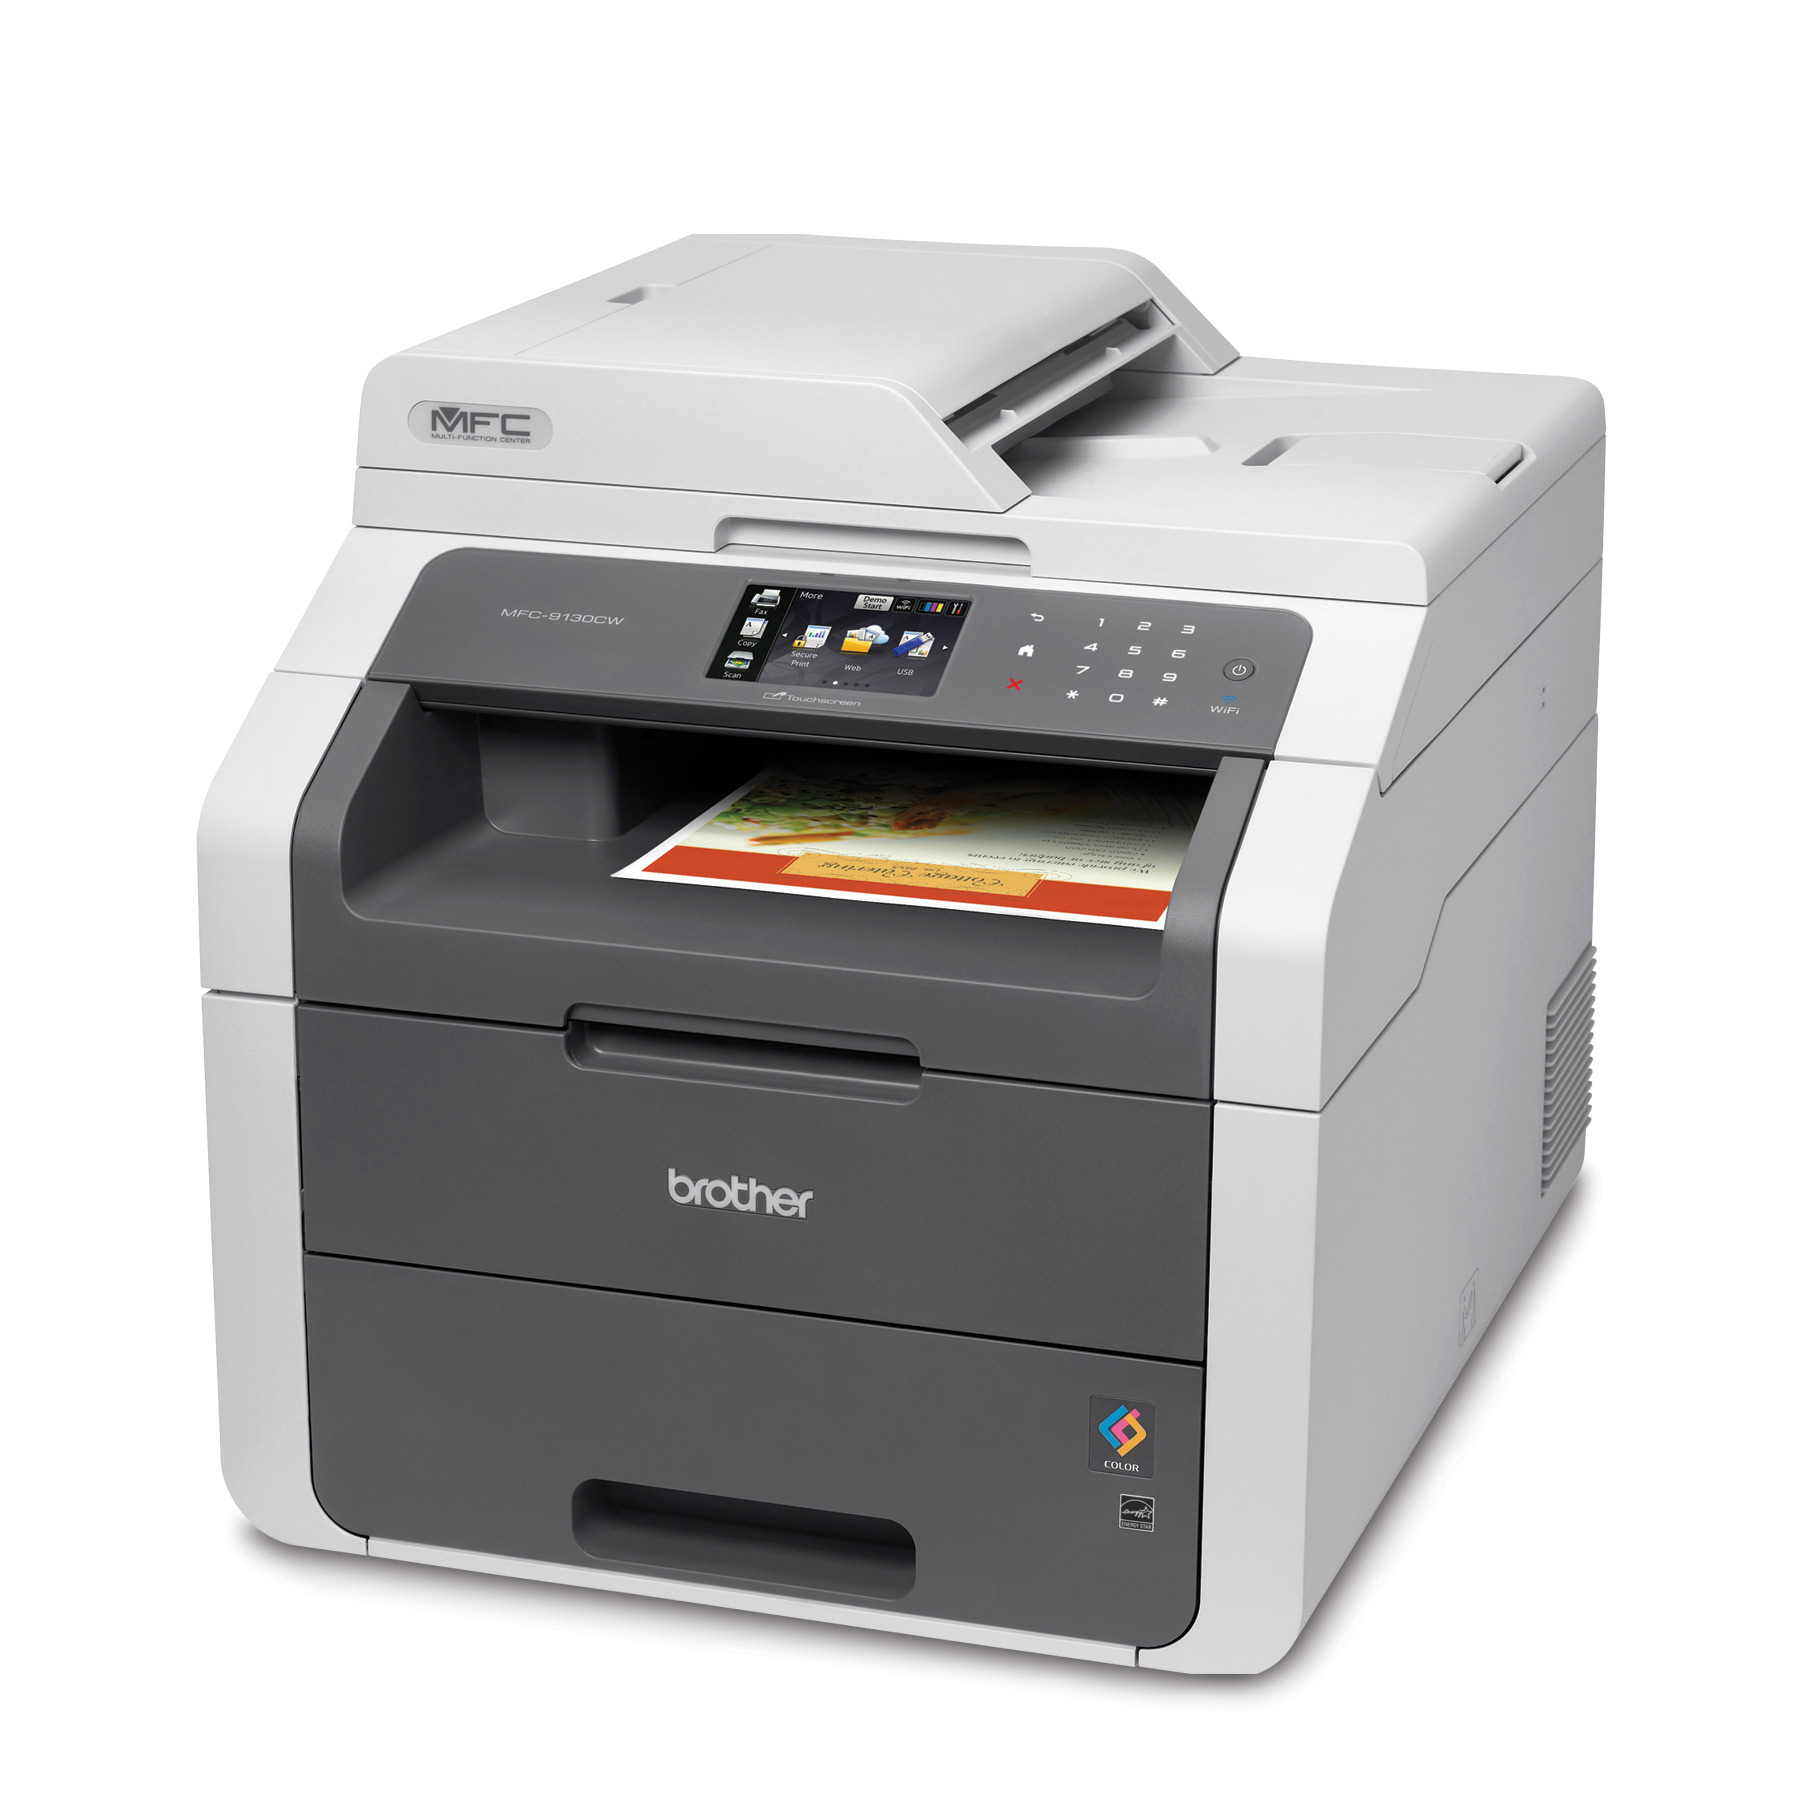 download brother printer driver mfc-9130cw